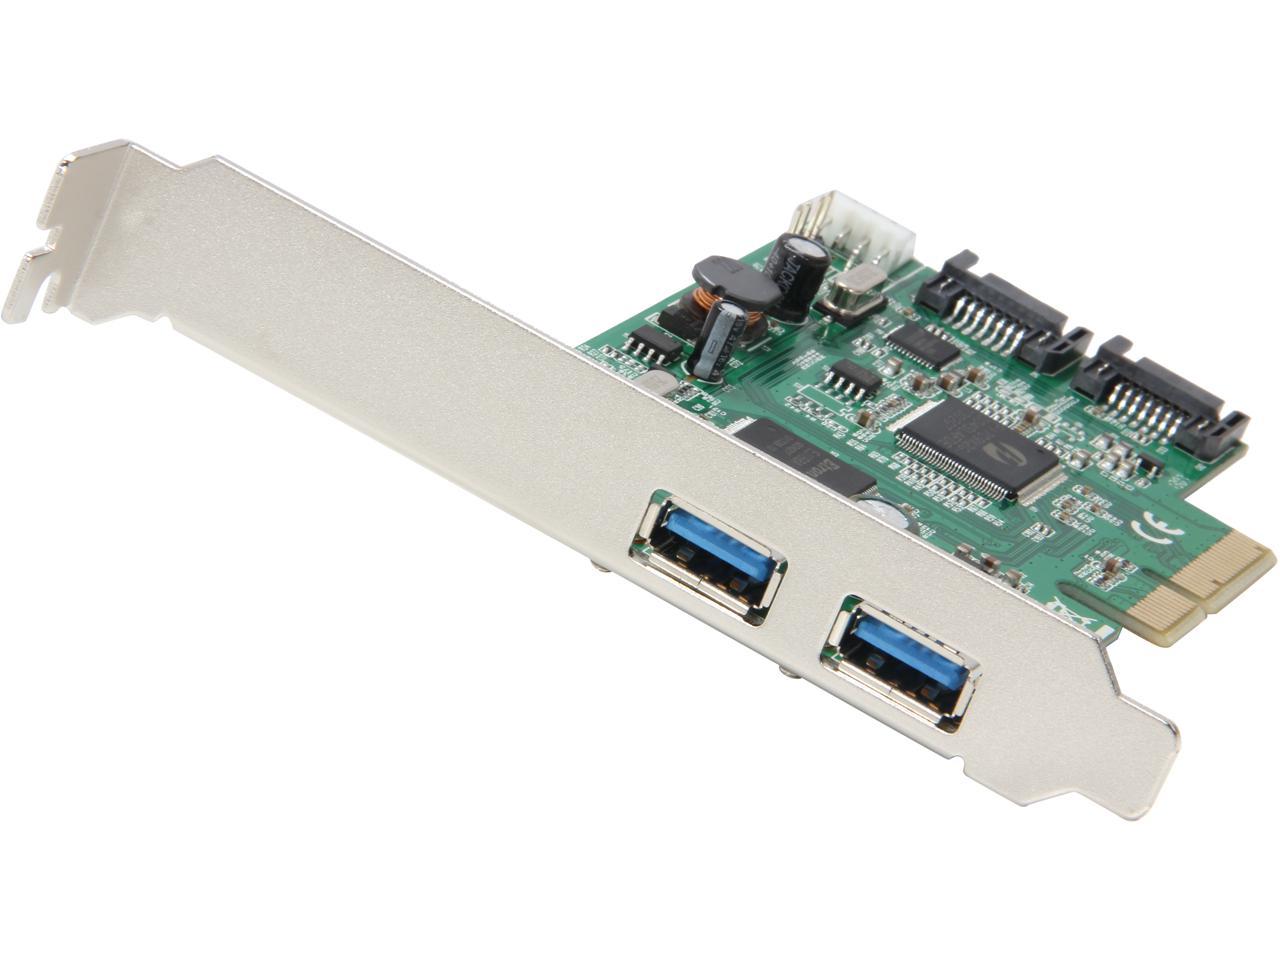 PCI-E SATA 3.0 Controller Card PCIe Expansion Card Pcie to Sata 3.0 Convert Interface for SSD Boot System Riser Controller for PC PCI-Express to SATA3.0 2-Port 